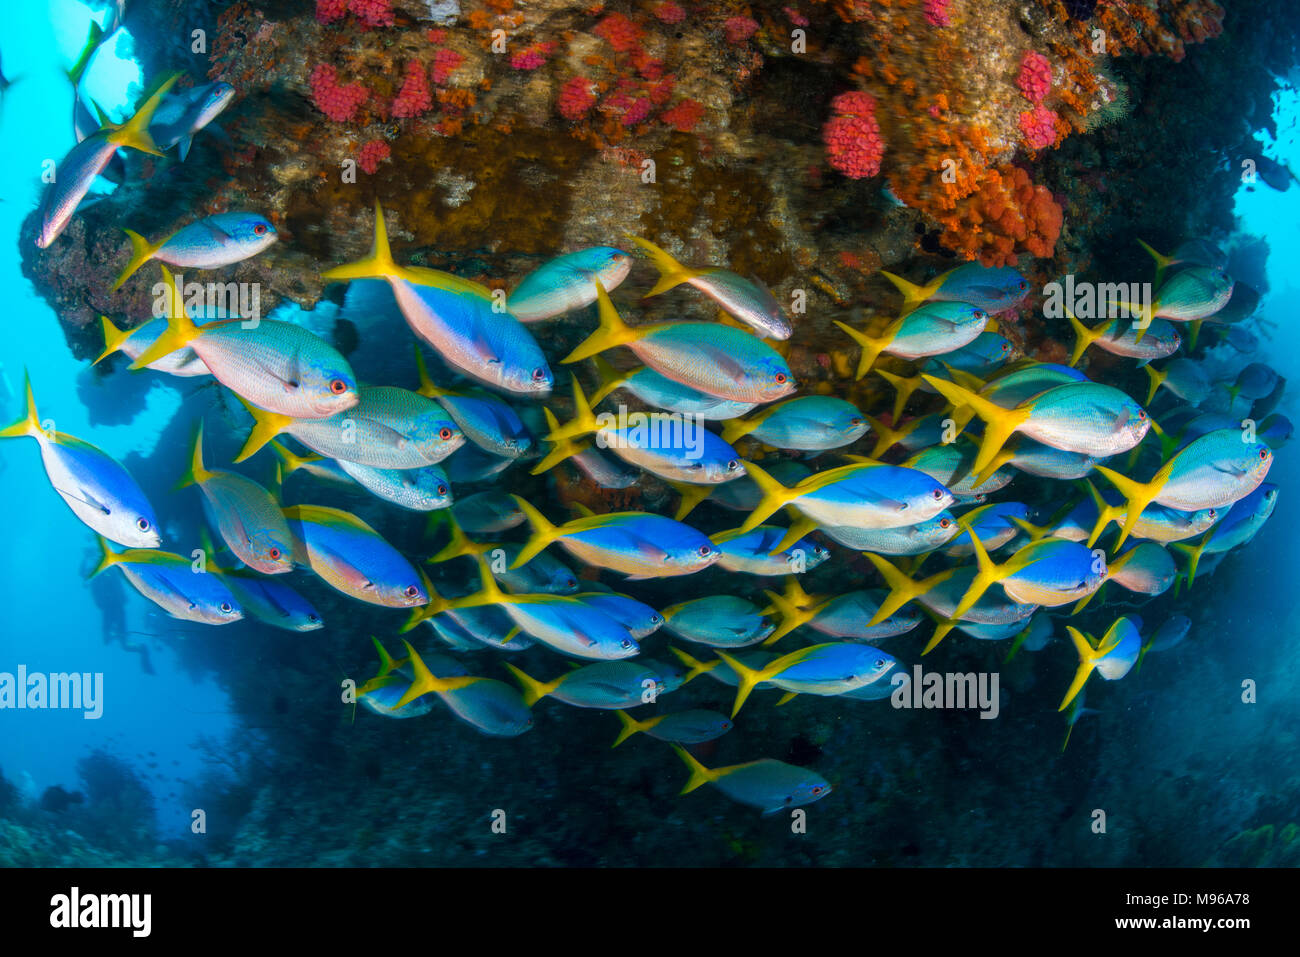 Slow shutter speed photo of schooling fusiliers swimming under a rock on a coral reef in Raja Ampat Marine Park, West Papua, Indonesia. Stock Photo